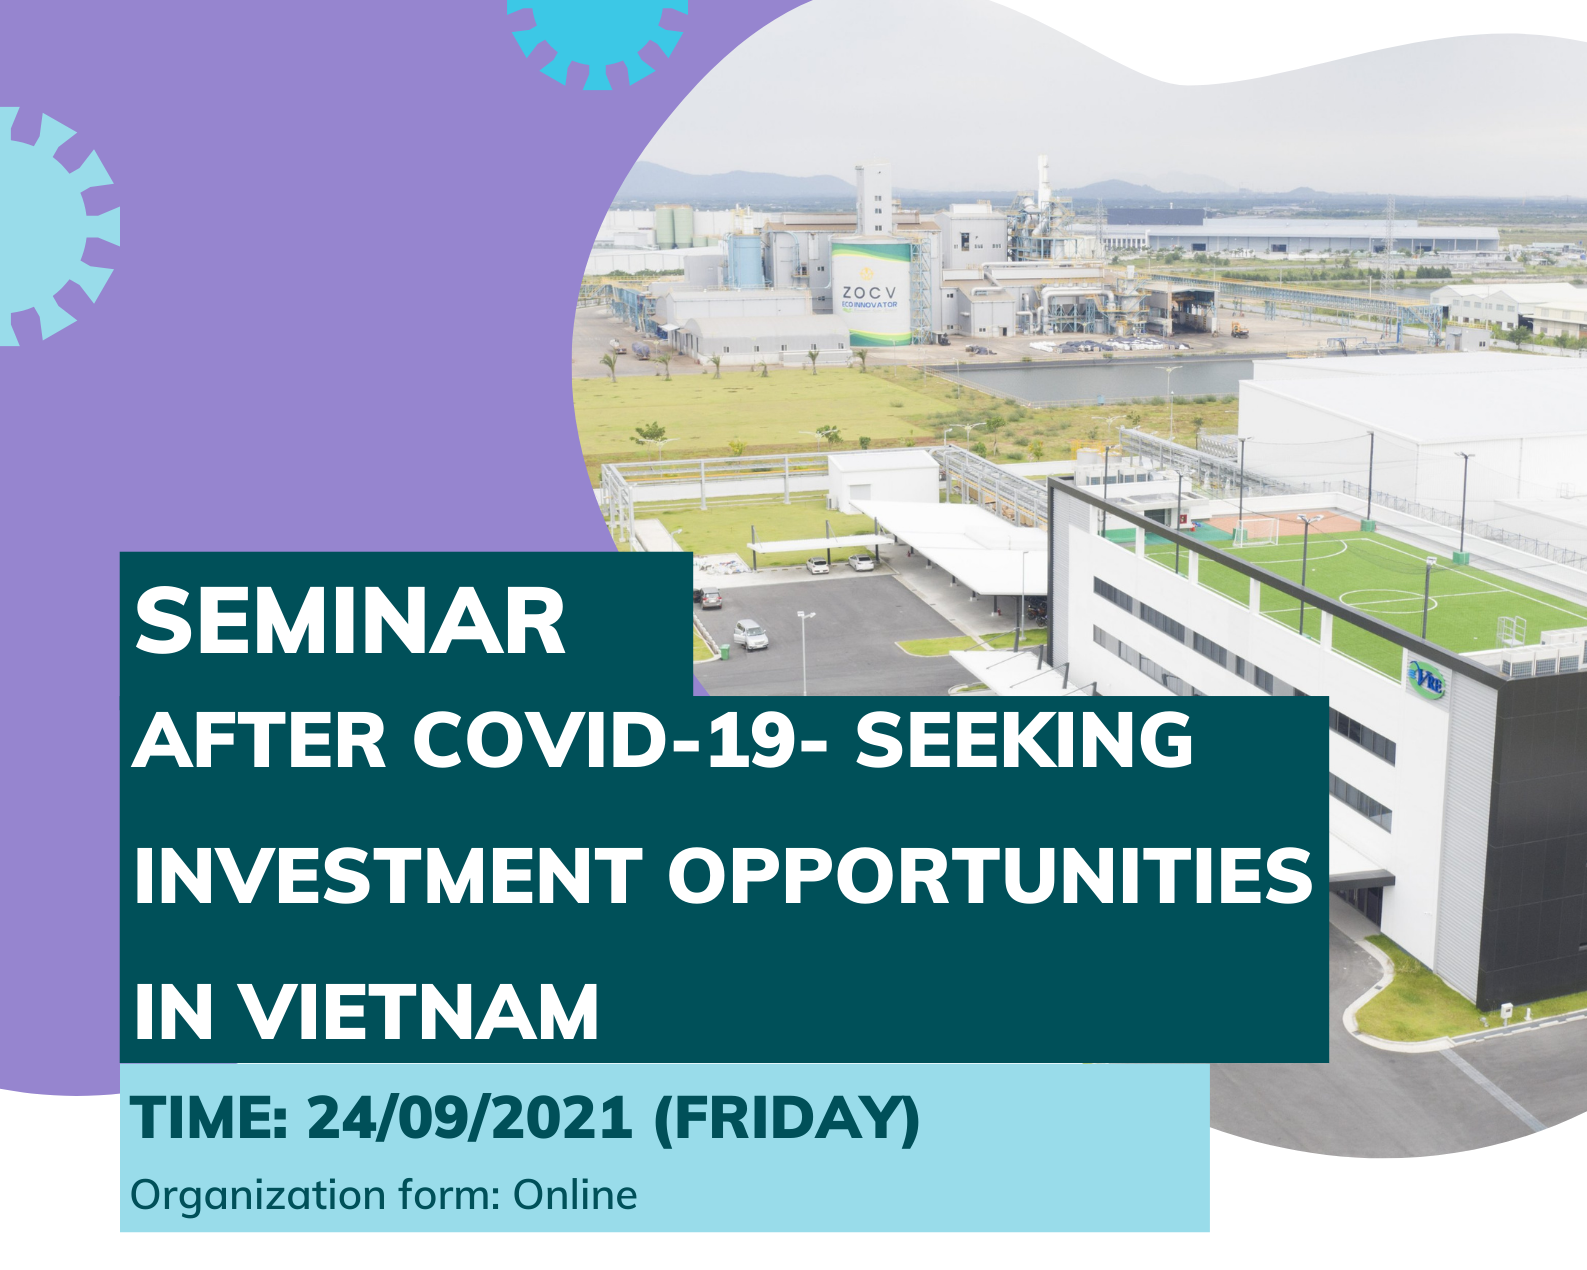 SEMINAR: AFTER COVID-19- SEEKING INVESTMENT OPPORTUNITIES IN VIETNAM